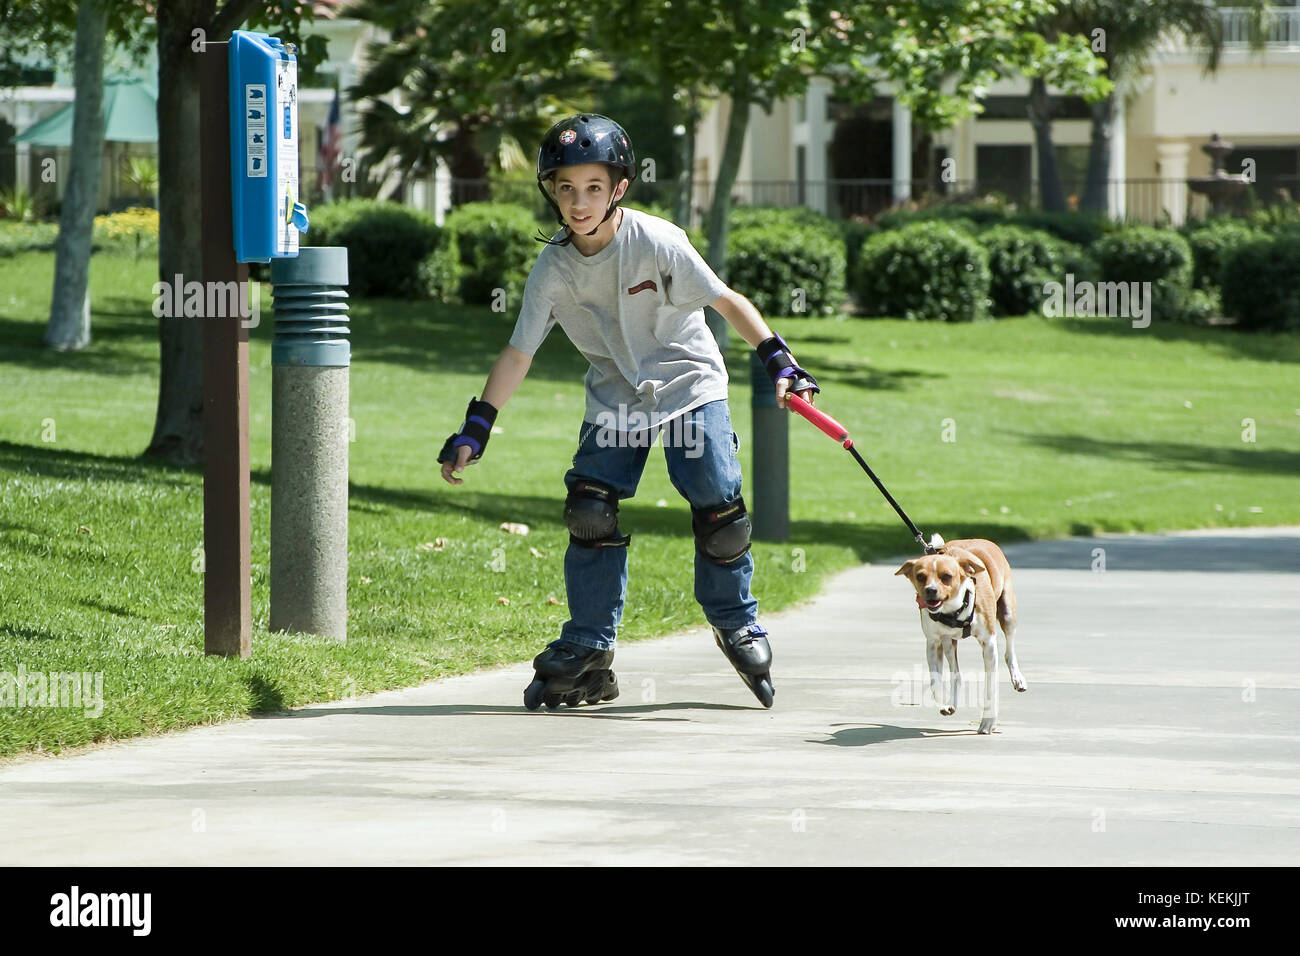 Healthy activity Young person child rollerblading with small little dog running on leash dog enjoying Summer front view   © Myrleen Pearson Stock Photo